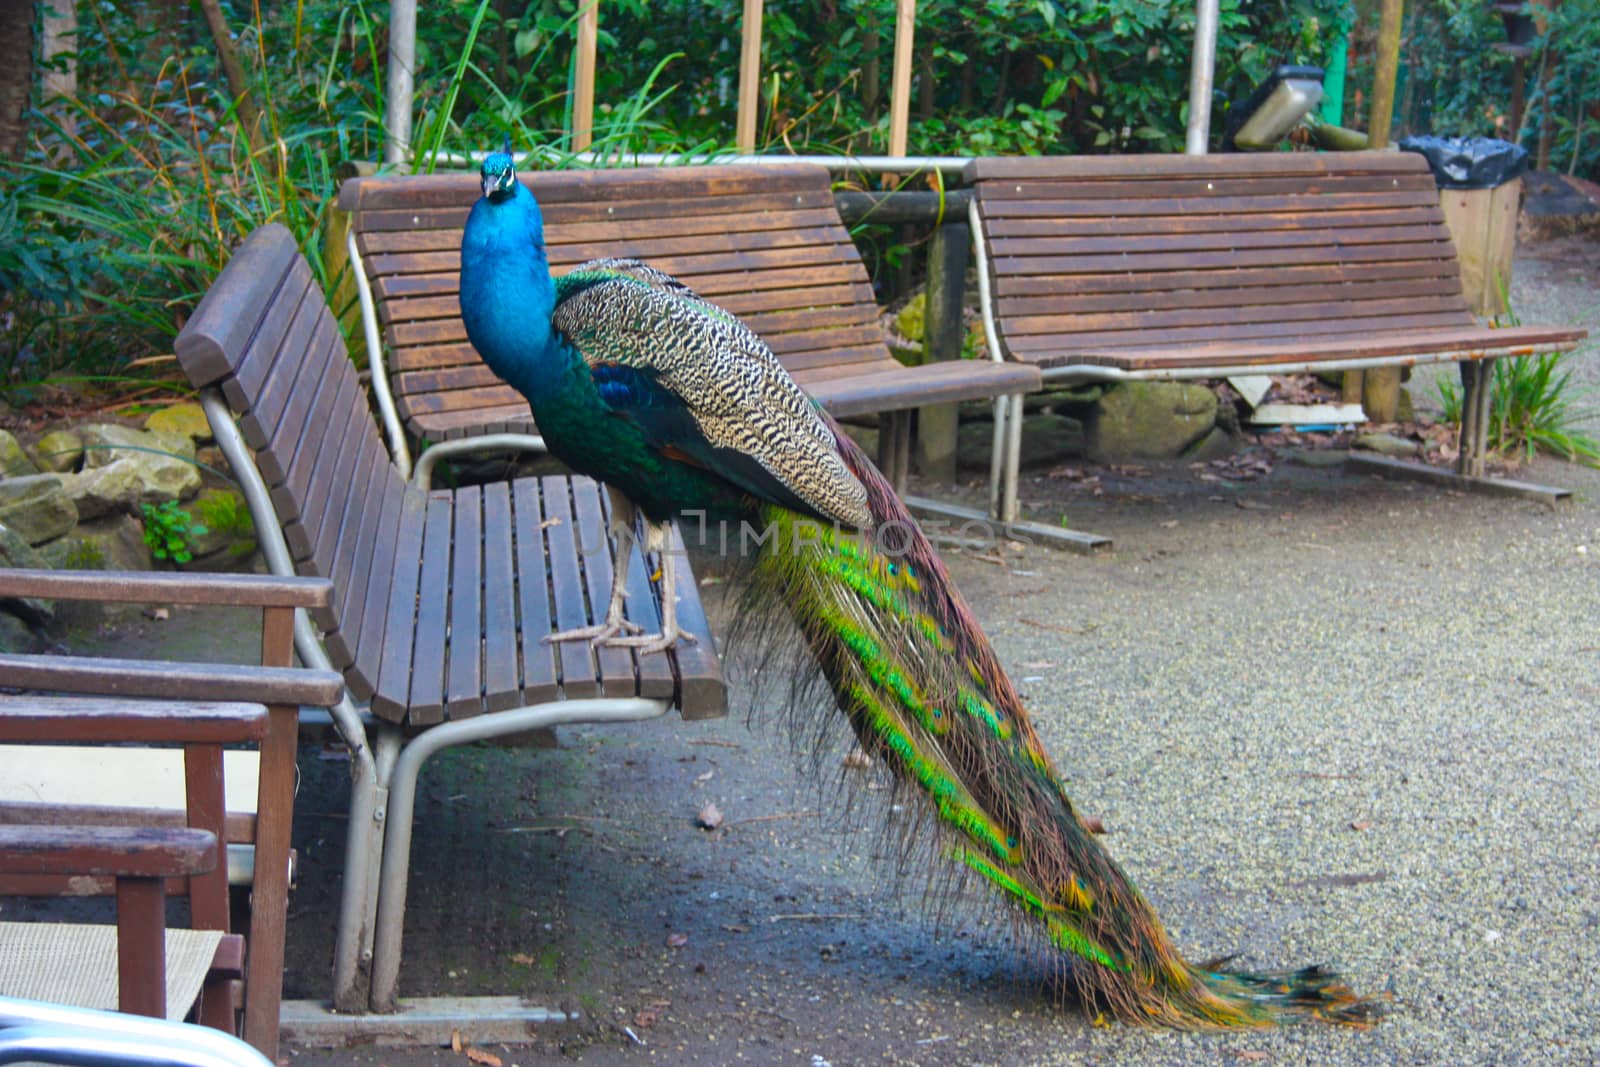 a beautiful specimen of peacock with a colorful tail in bright green and blue colors in a park on a wooden bench by alessiapenny90